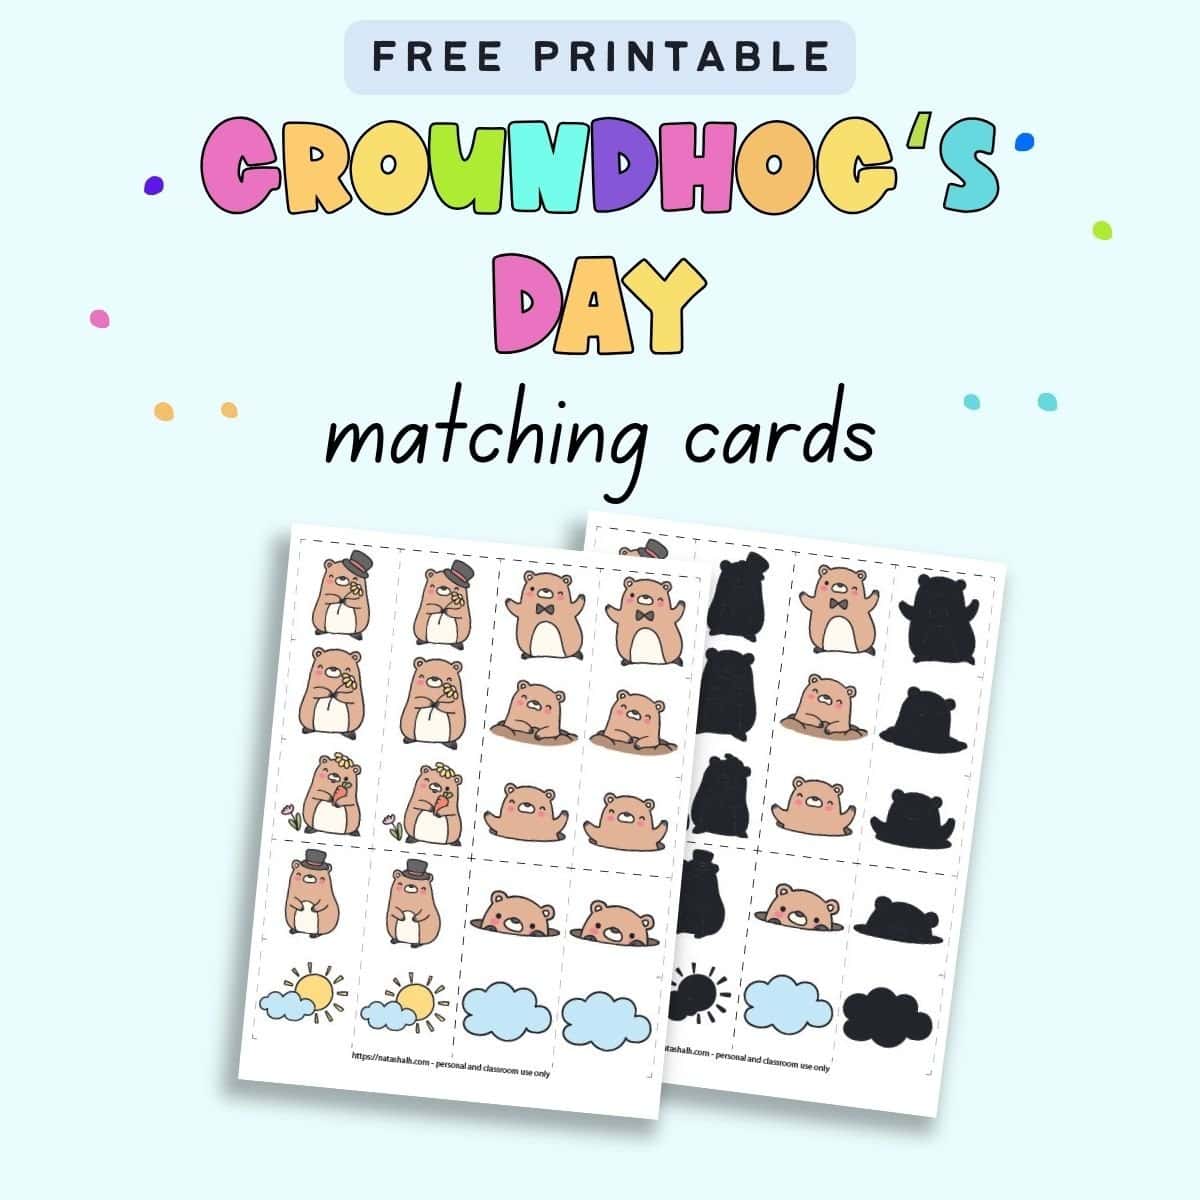 Text "free printable Groundhog's Day matching cards" with a preview of two page of printable matching card with a groundhog theme 